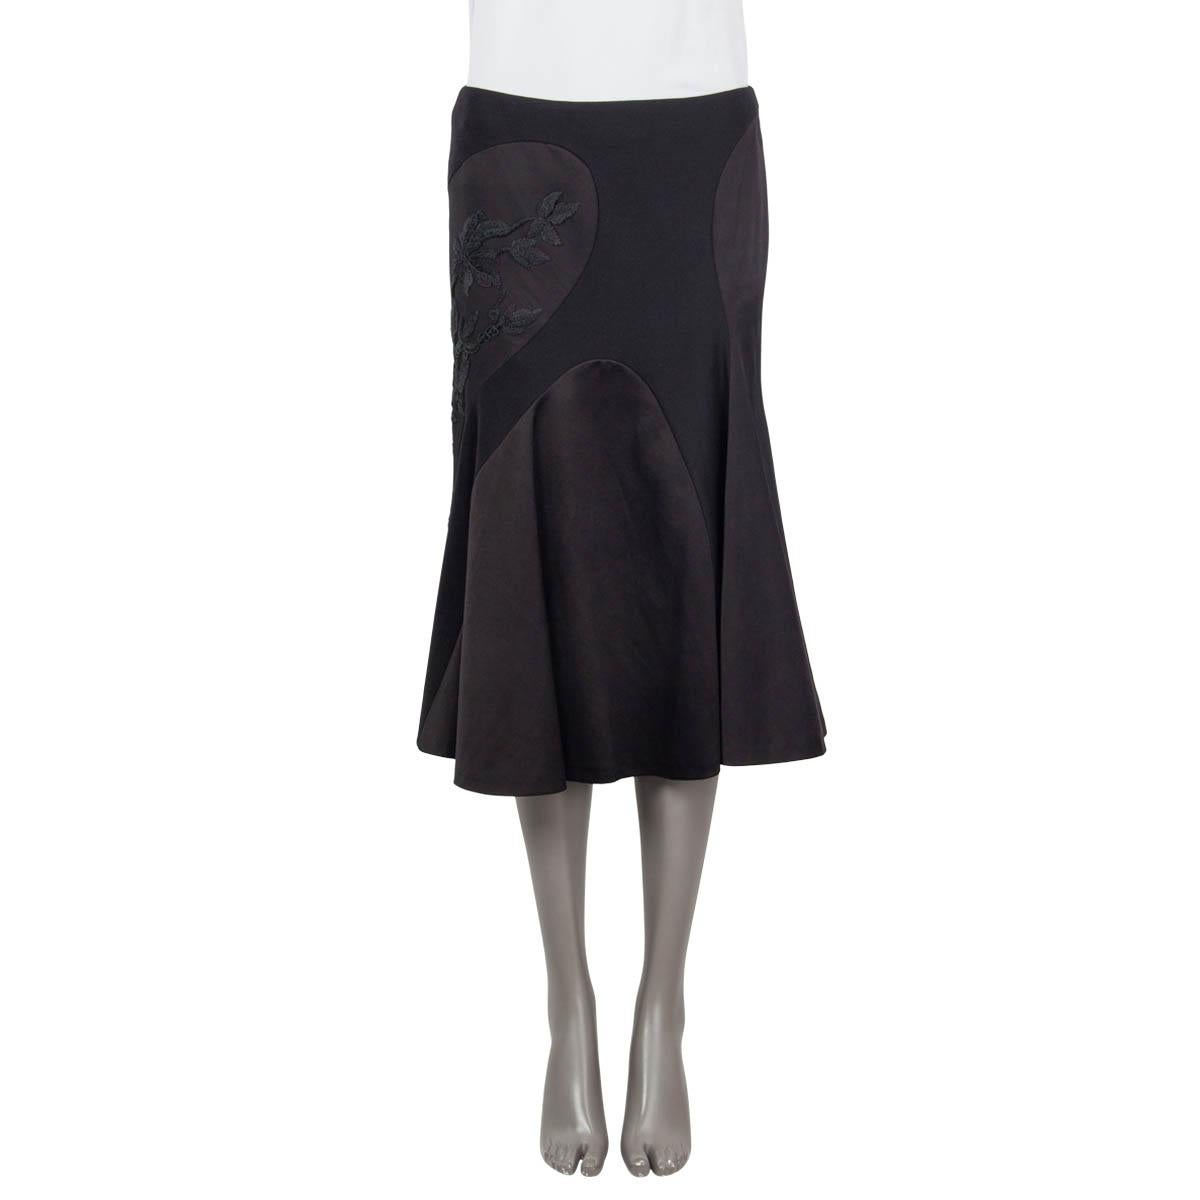 100% authentic Alexander McQueen flared skirt in black wool (39%), cotton (38%), silk (18%), polyamide (4%) and elastane (1%). Lined. Opens with a zipper on the back. Embellished with petrol green and dark brown leaves on black tulle. Has been worn